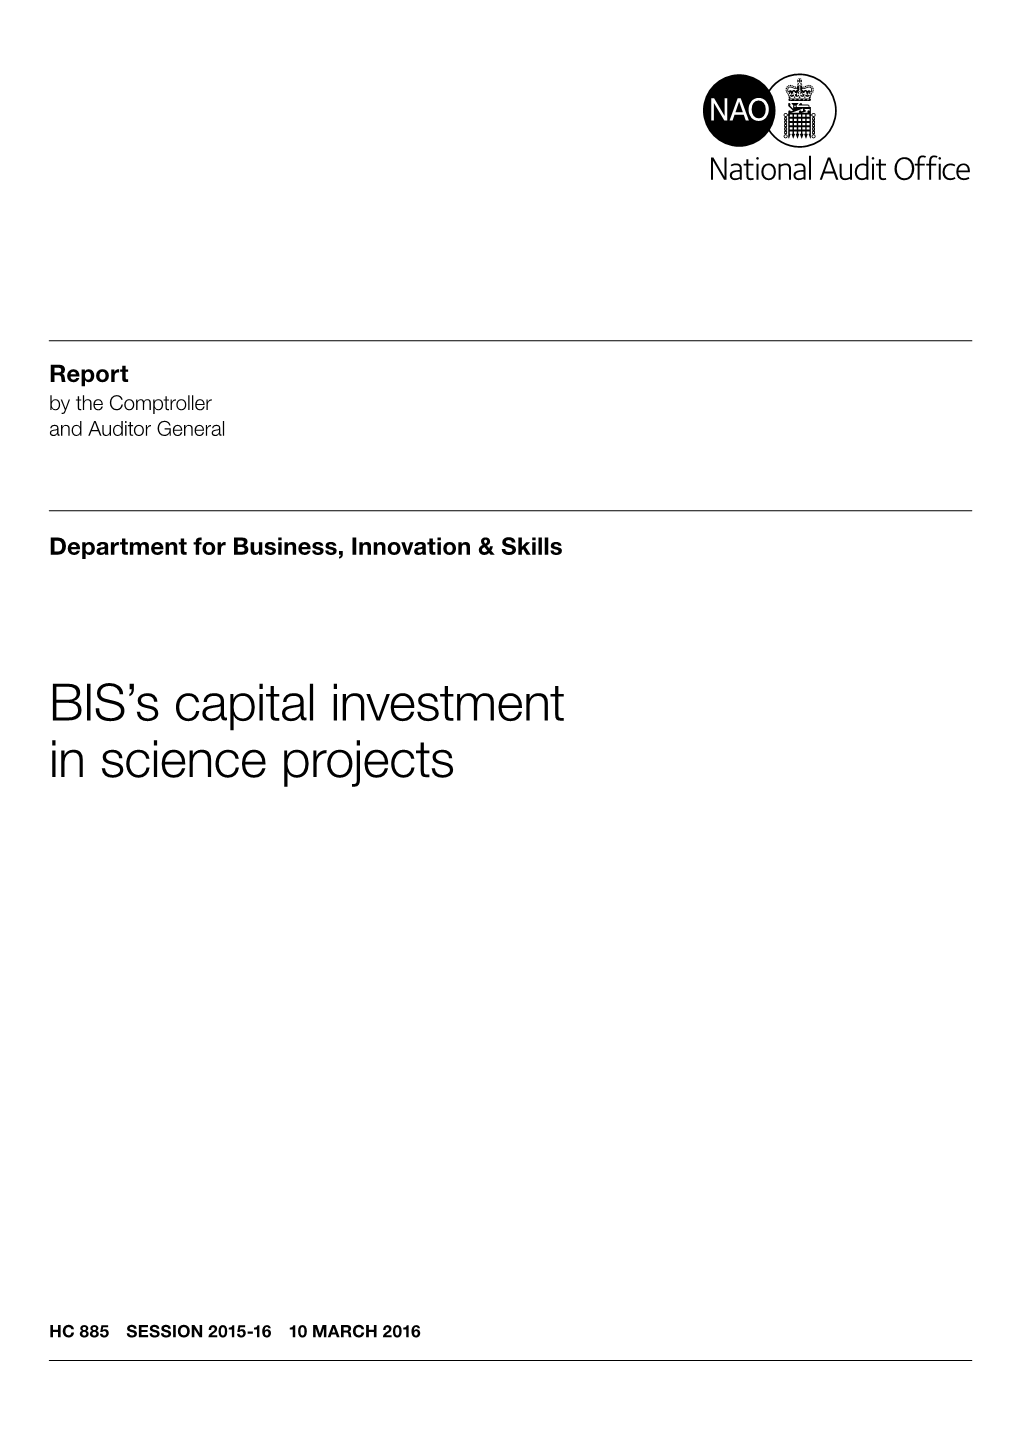 BIS's Capital Investment in Science Projects